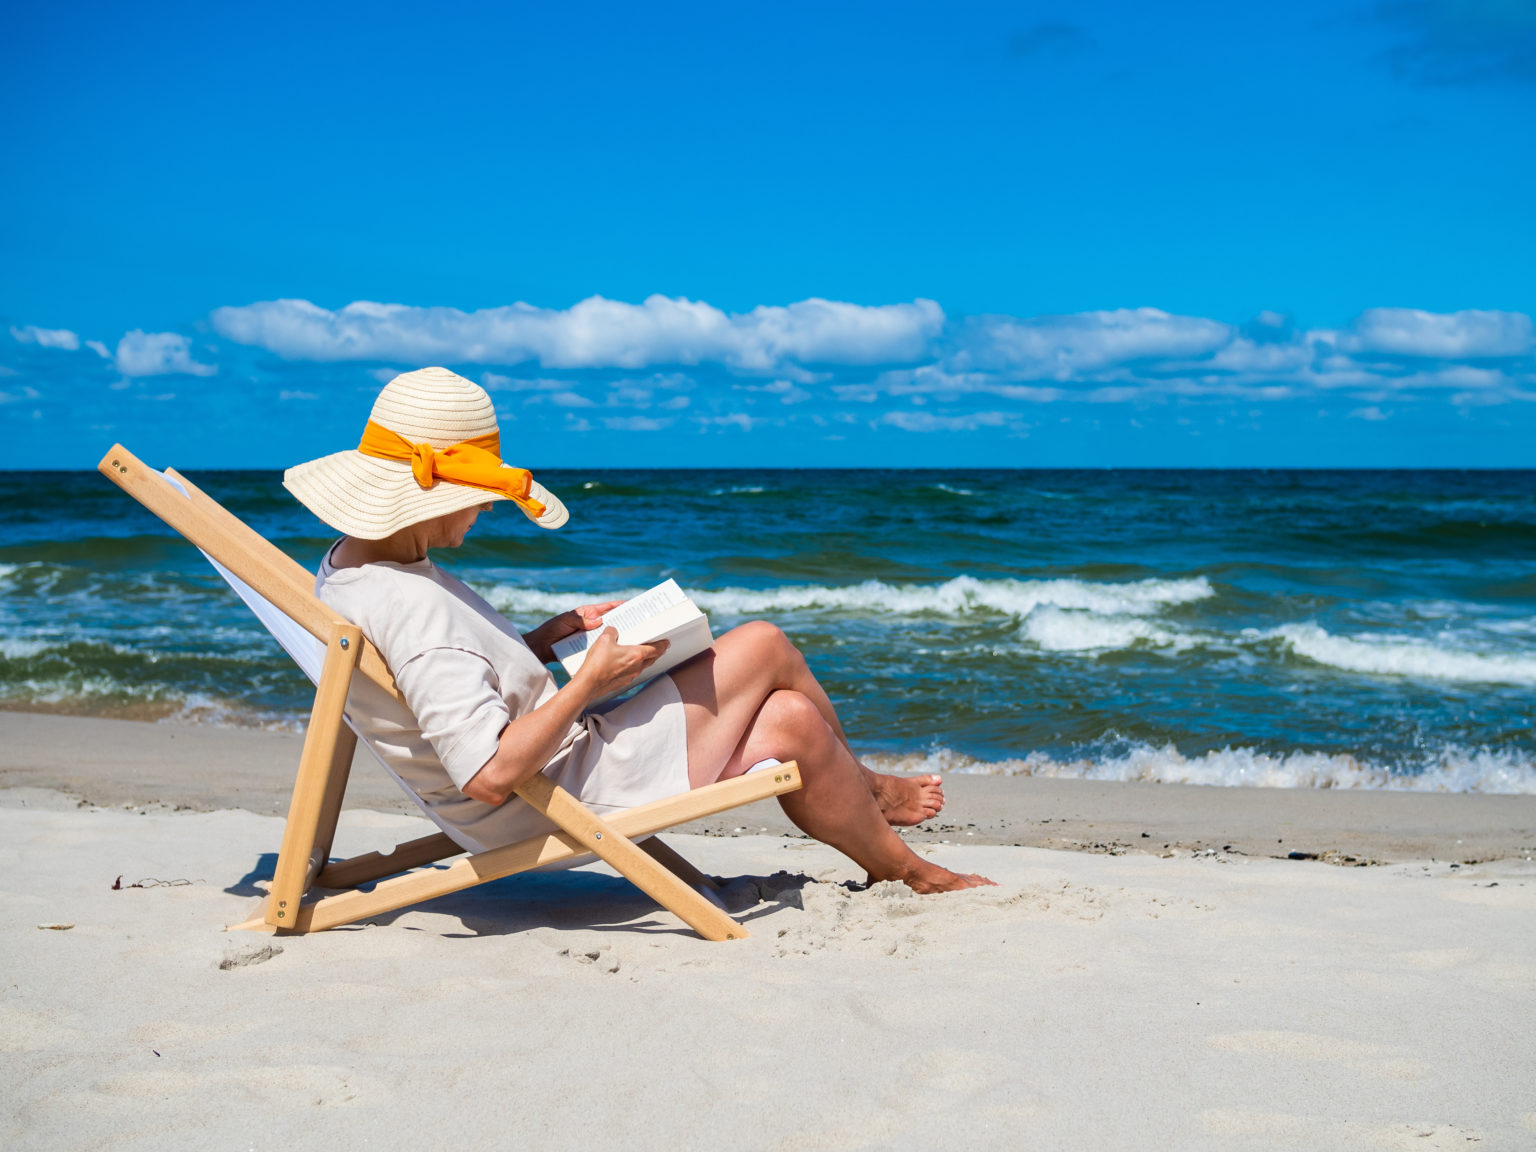 Enjoy your summer vacation with Owl Practice's private practice management solution.